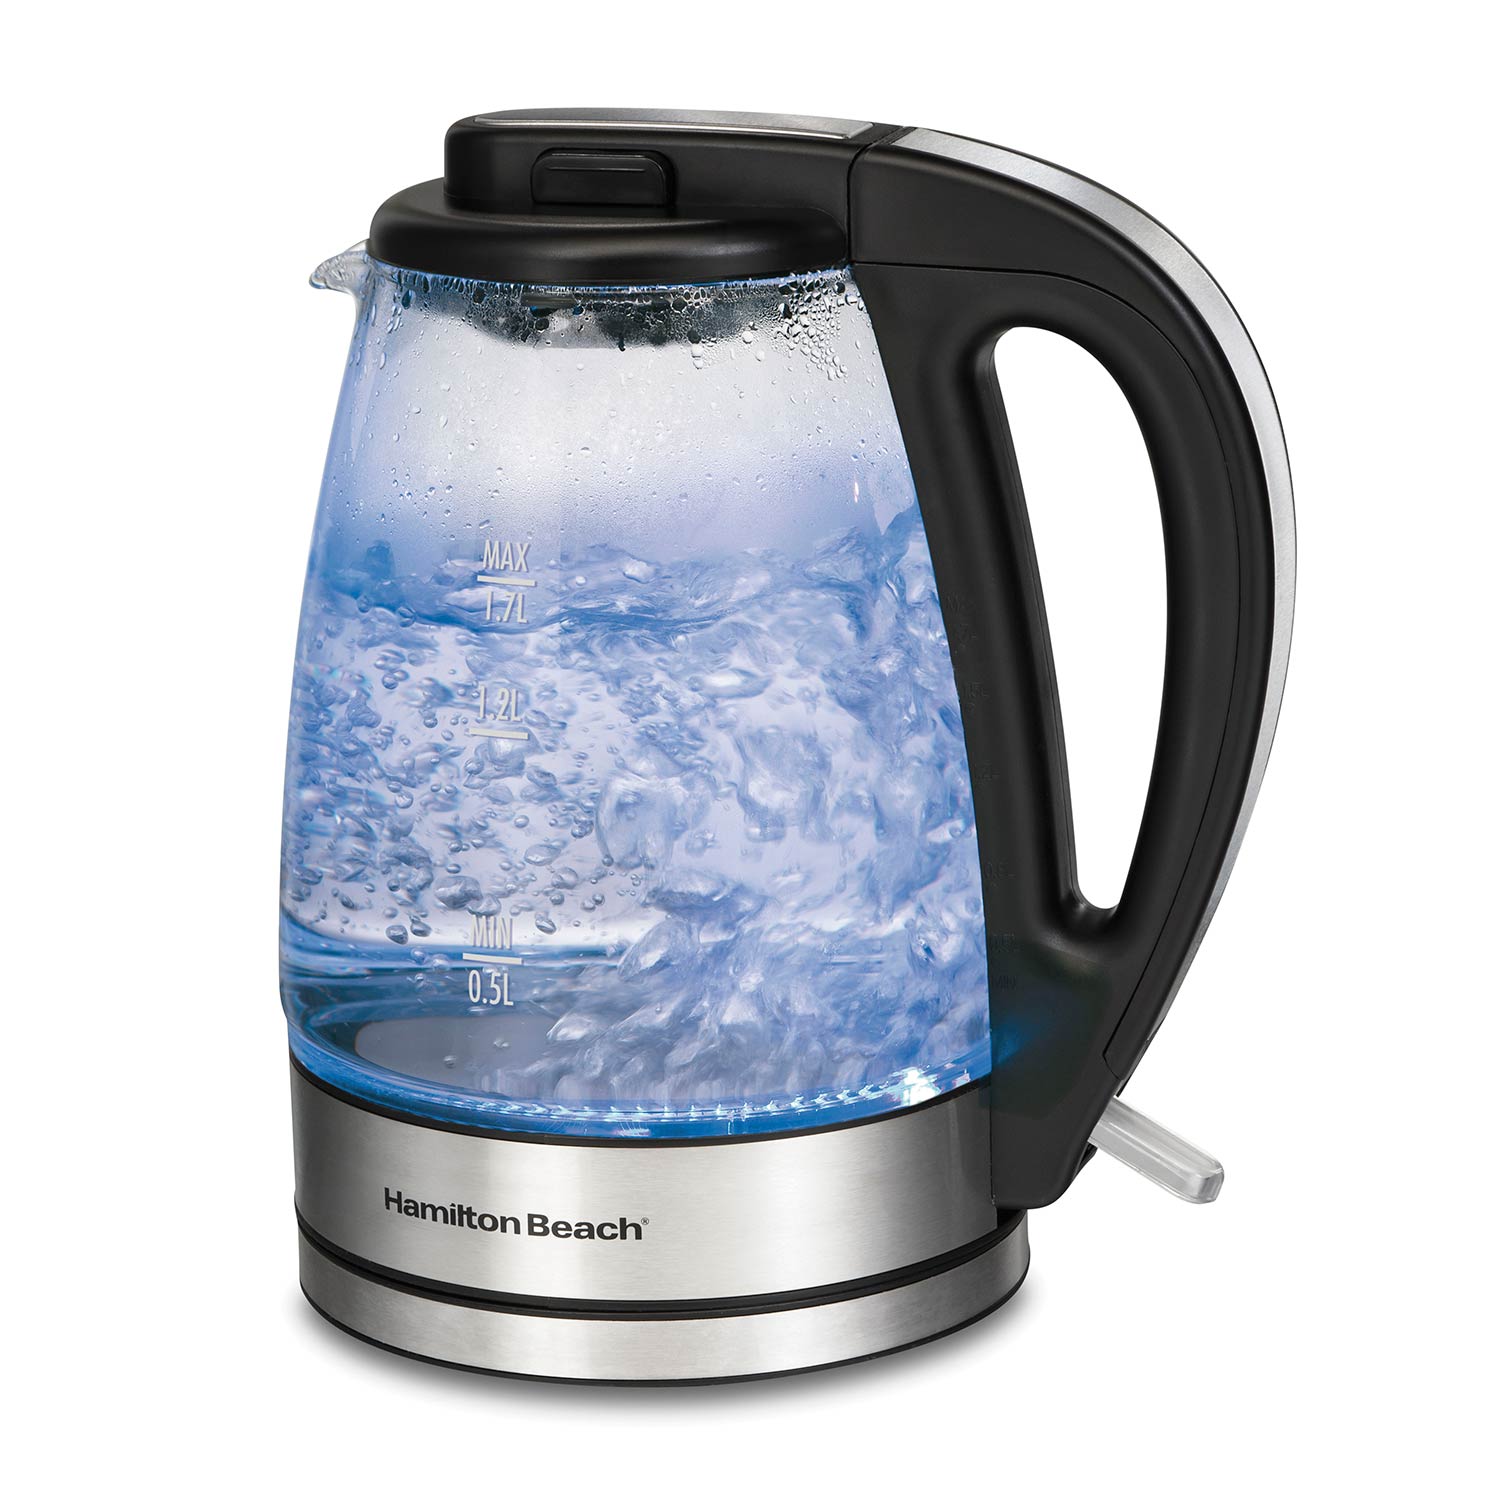 1.7 Liter Glass Kettle with Automatic Shutoff (40864)